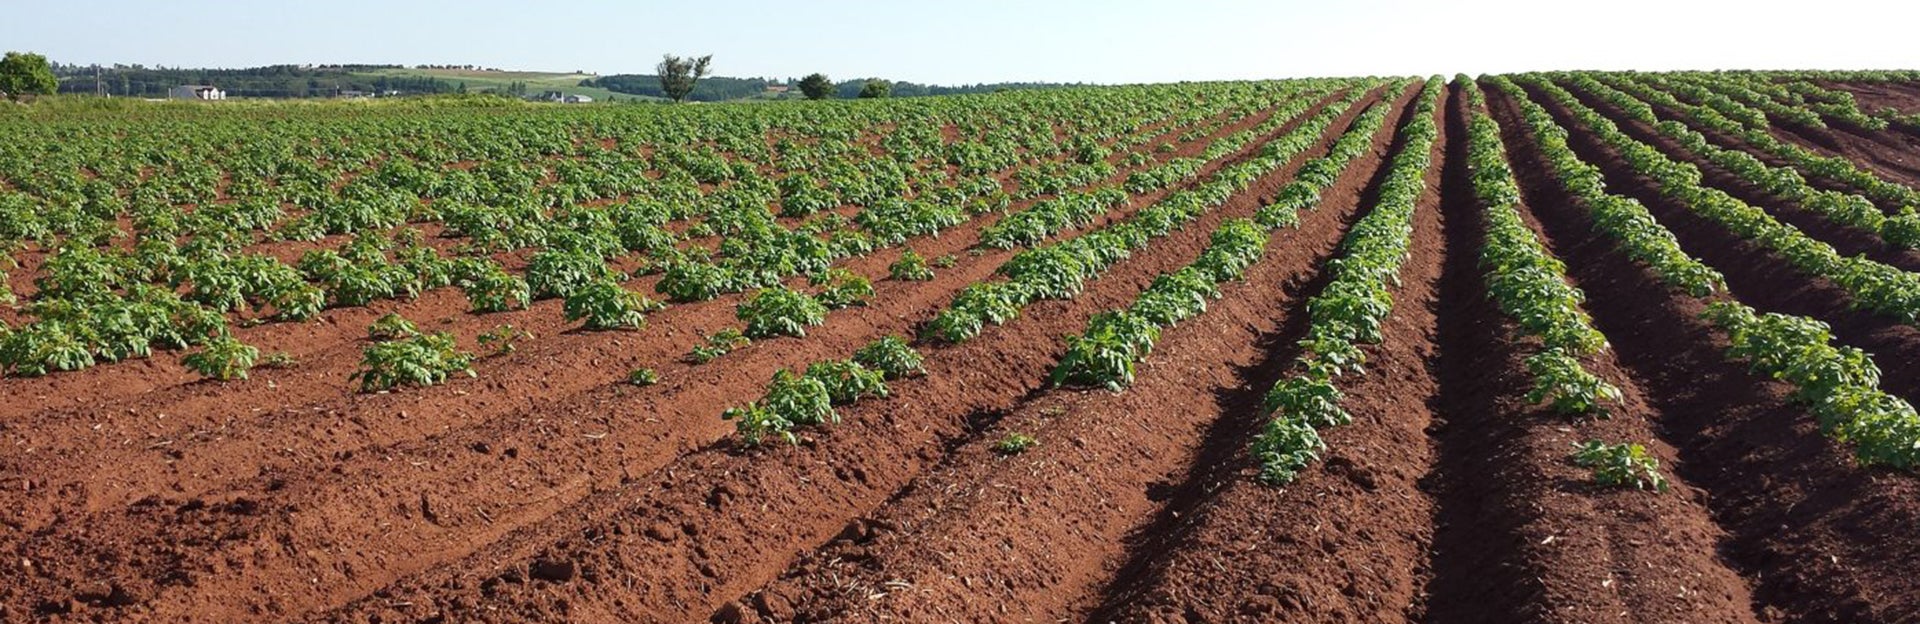 soil and row crops